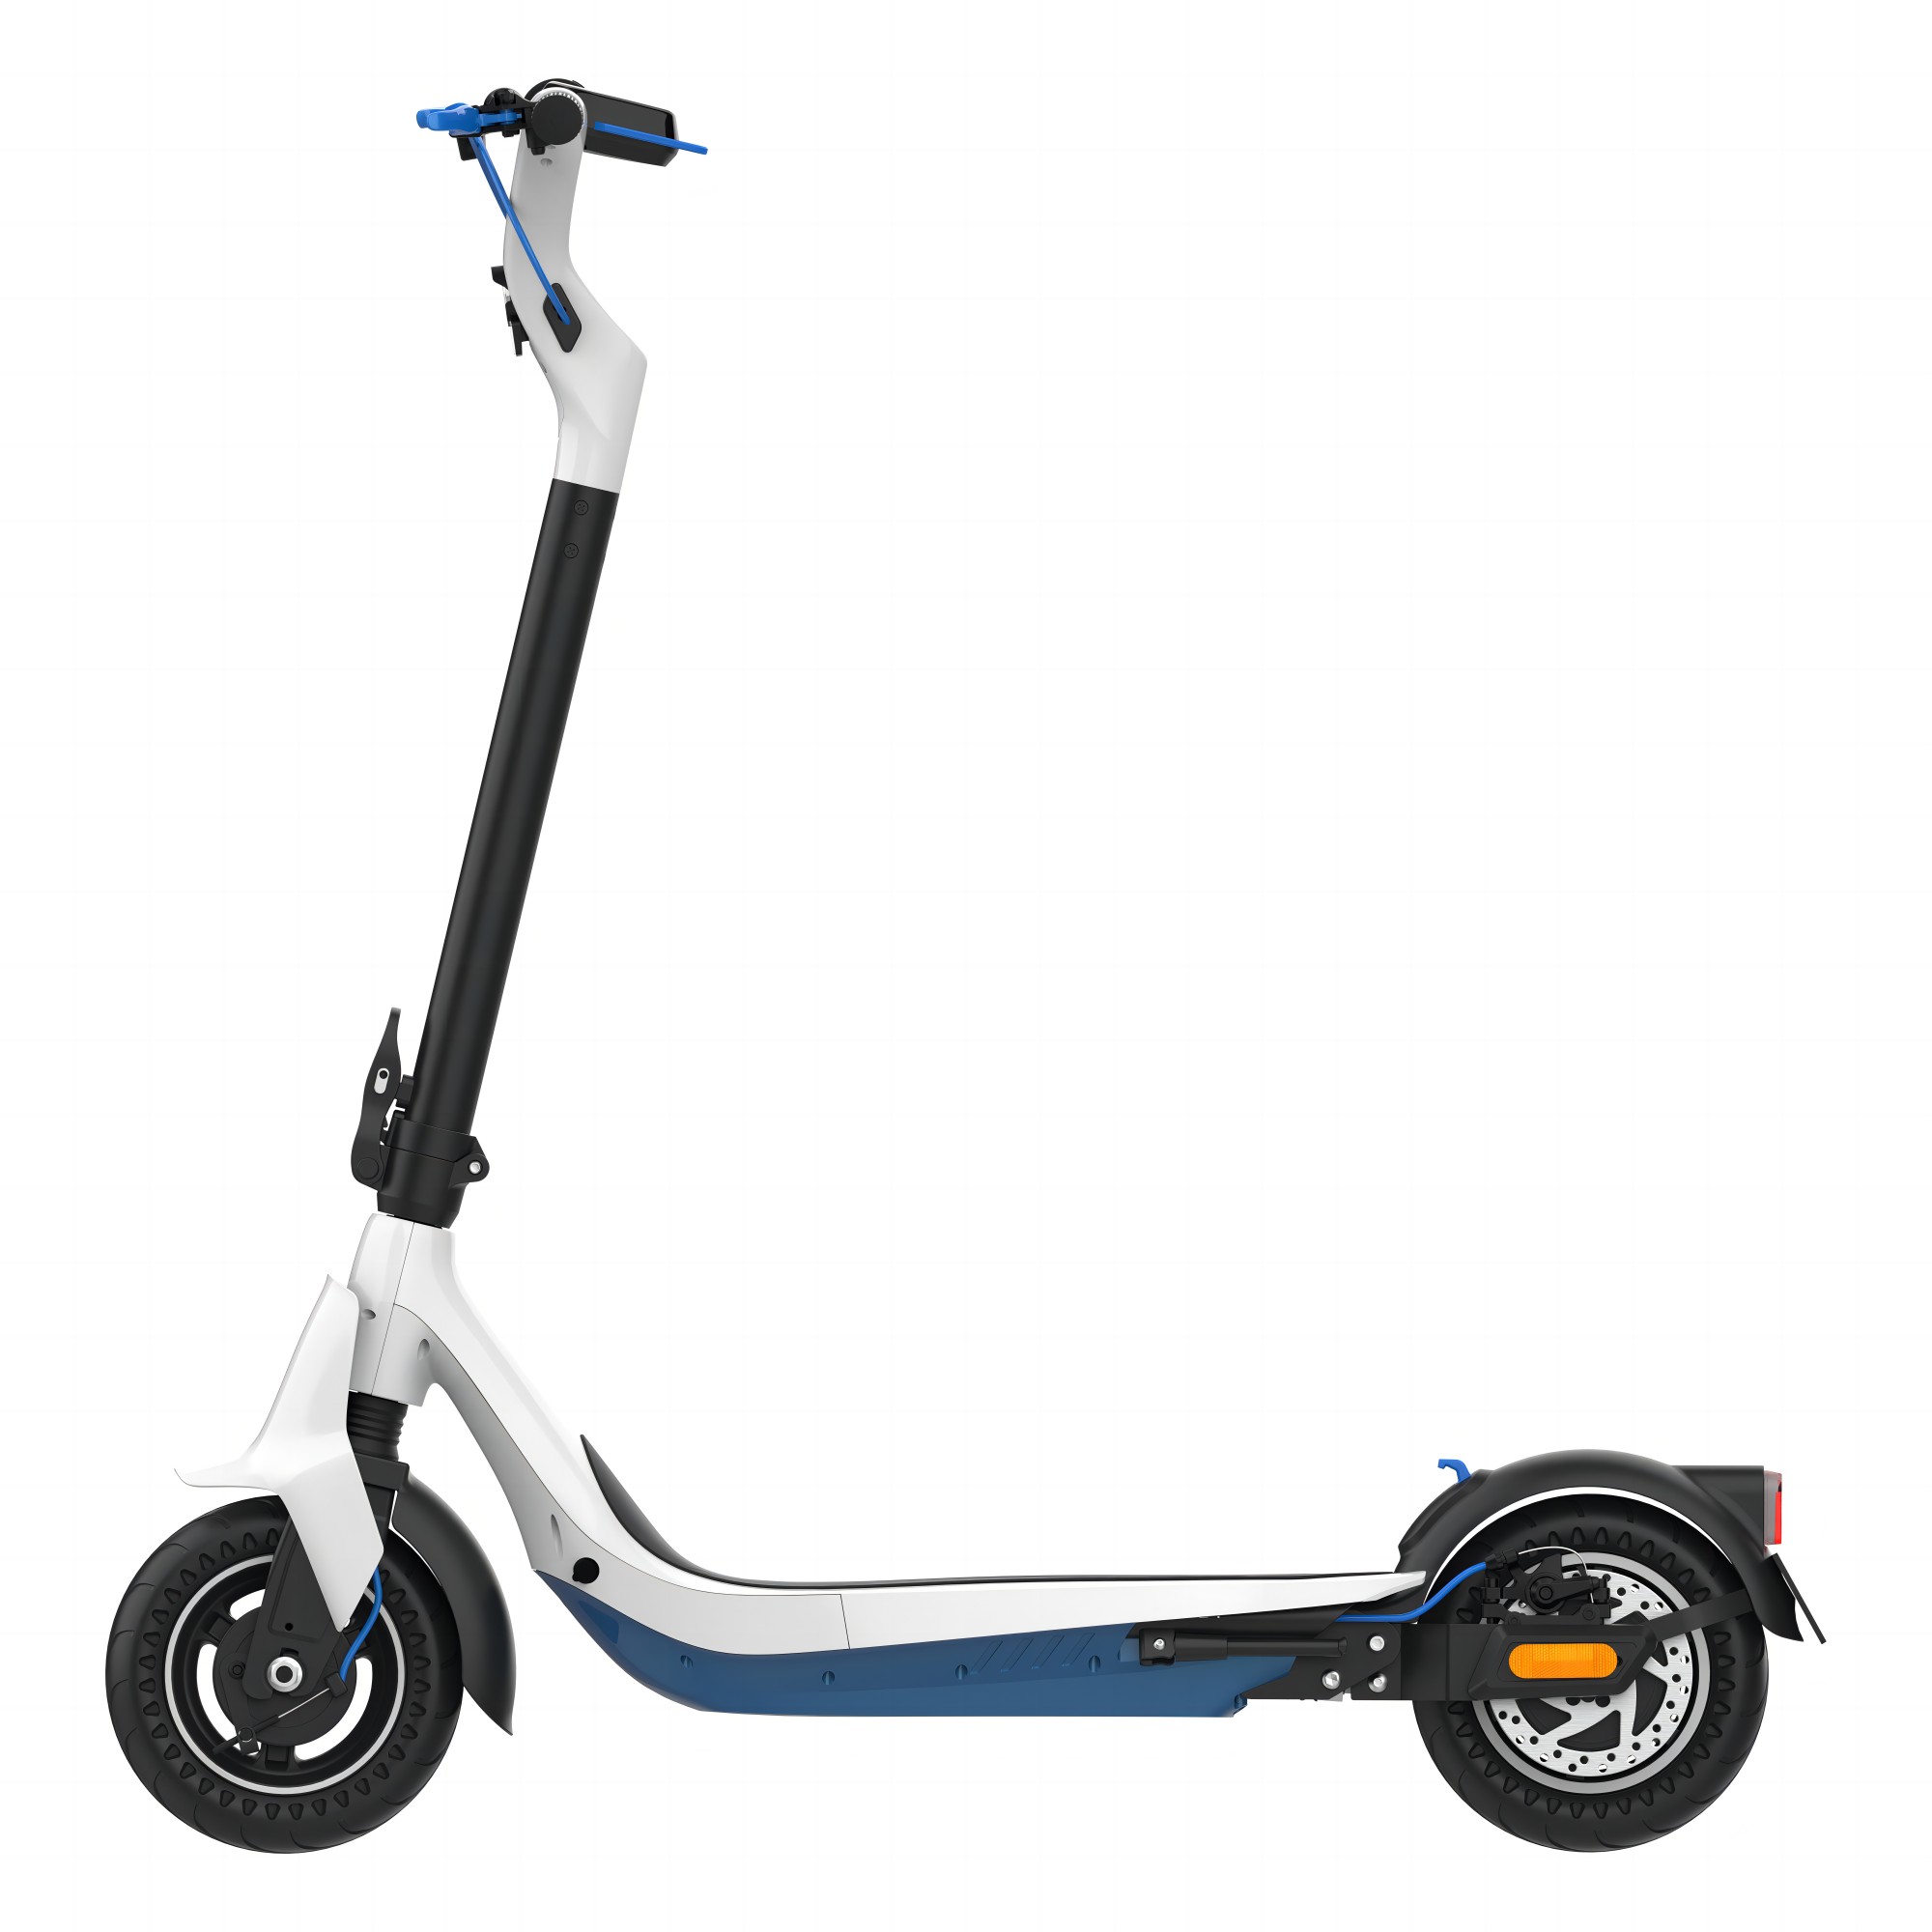 KINGSONG Electric Scooter N15 PRO - OPENED BOX 75099